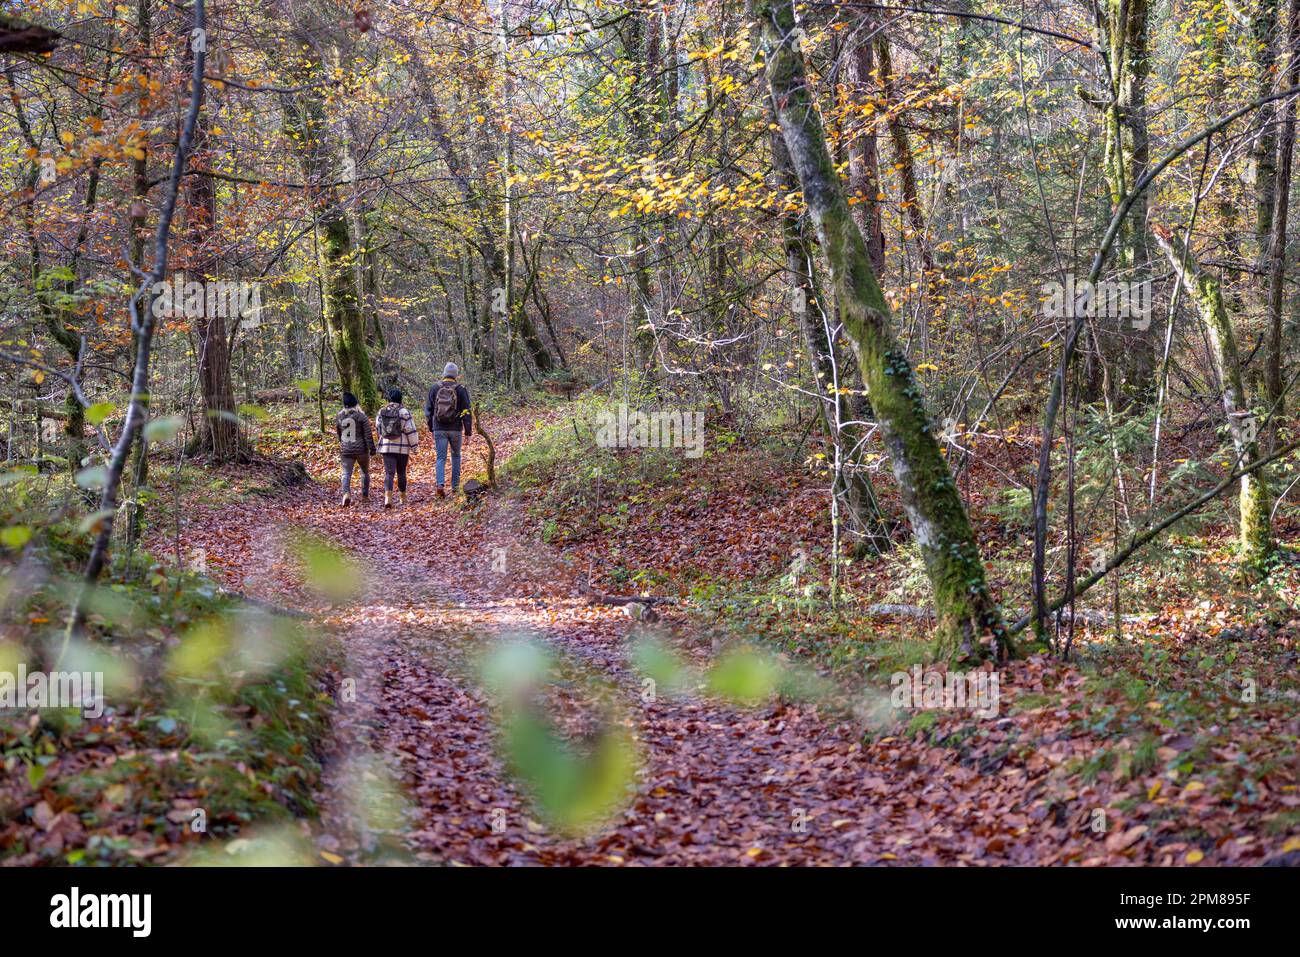 France, Haute-Savoie, Giffre valley, Morillon, 3 friends on a walk in the forest on a path in autumn Stock Photo